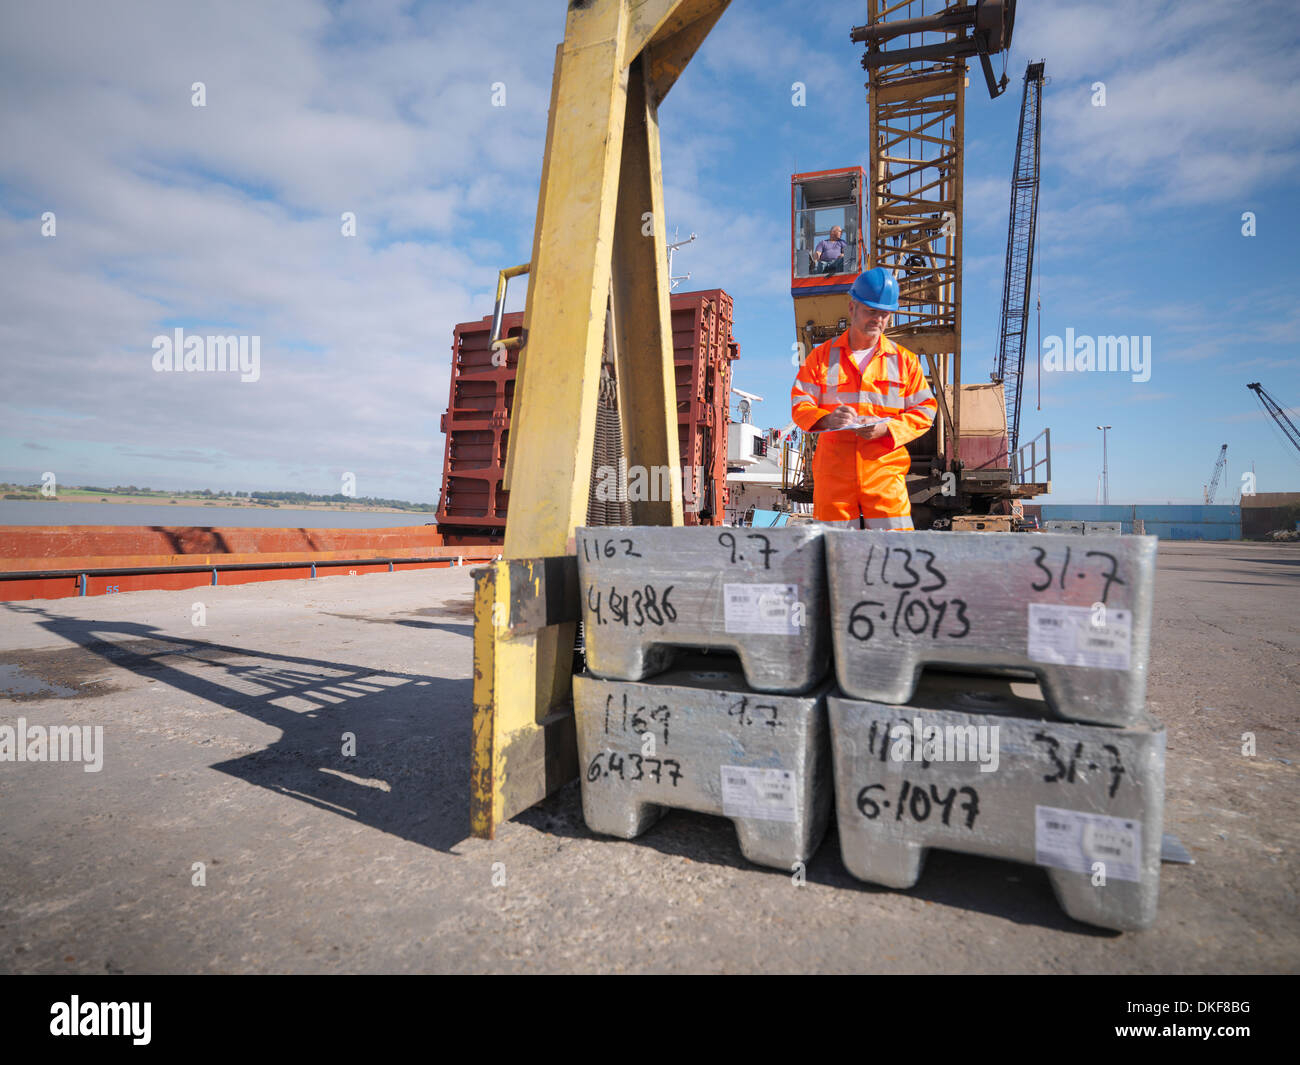 Worker inspecting metal alloy unloaded from ship Stock Photo